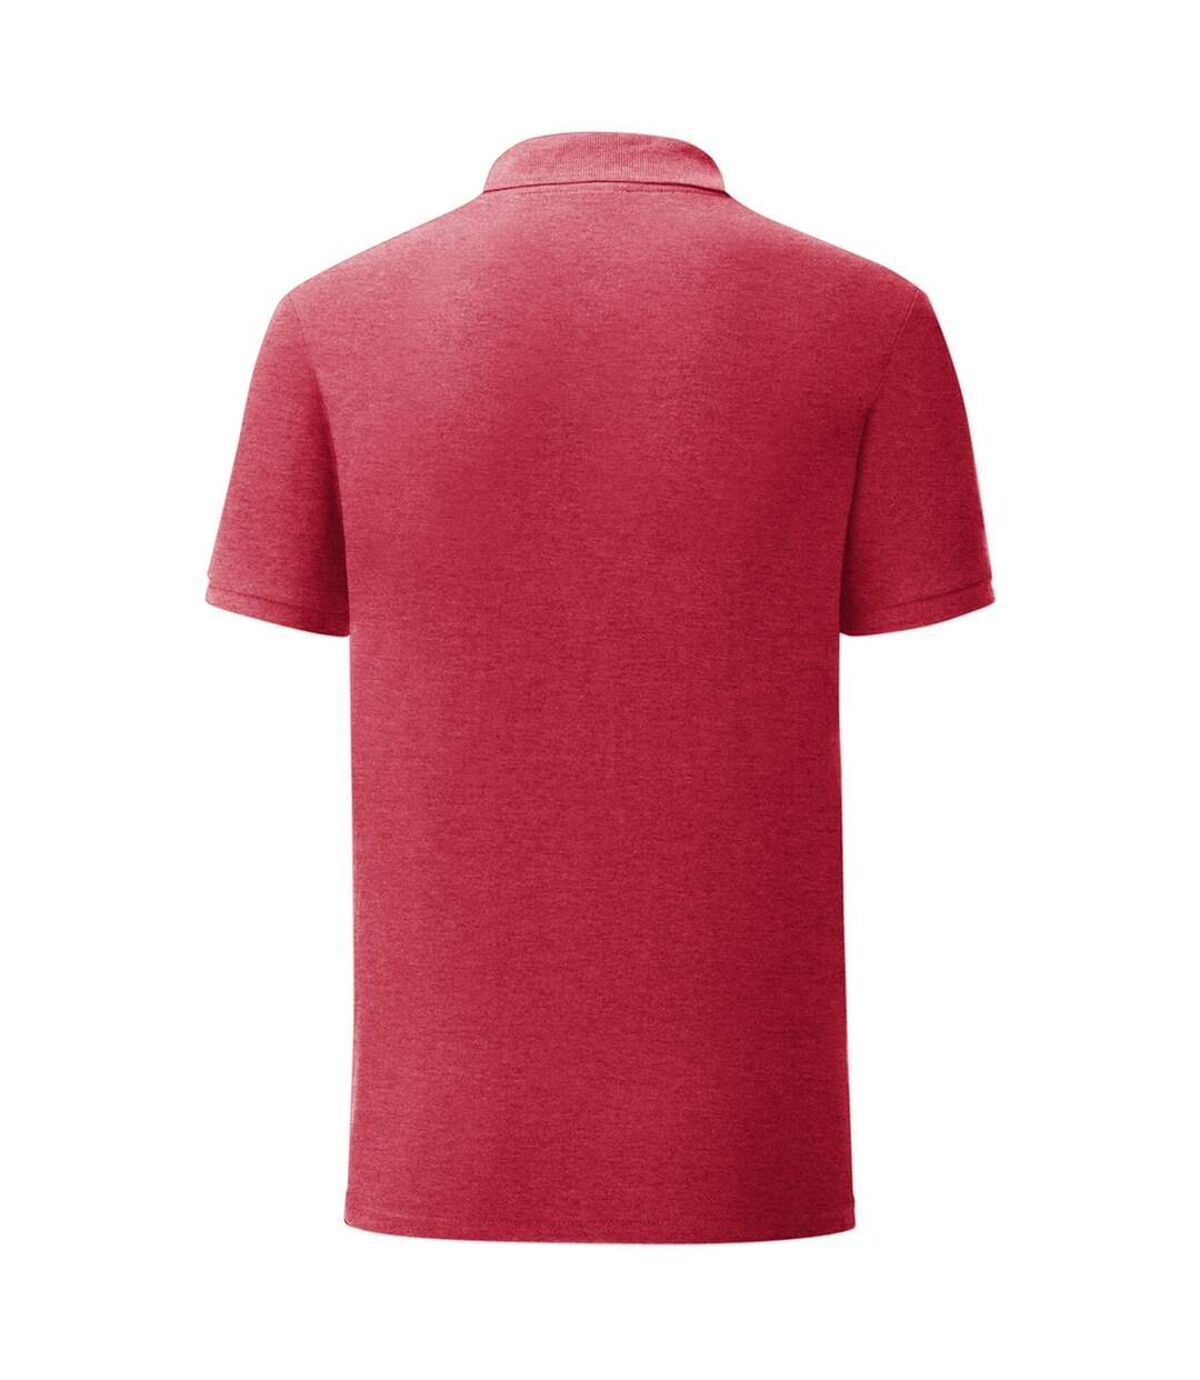 Fruit Of The Loom Mens Iconic Pique Polo Shirt (Heather Red) - UTPC3571